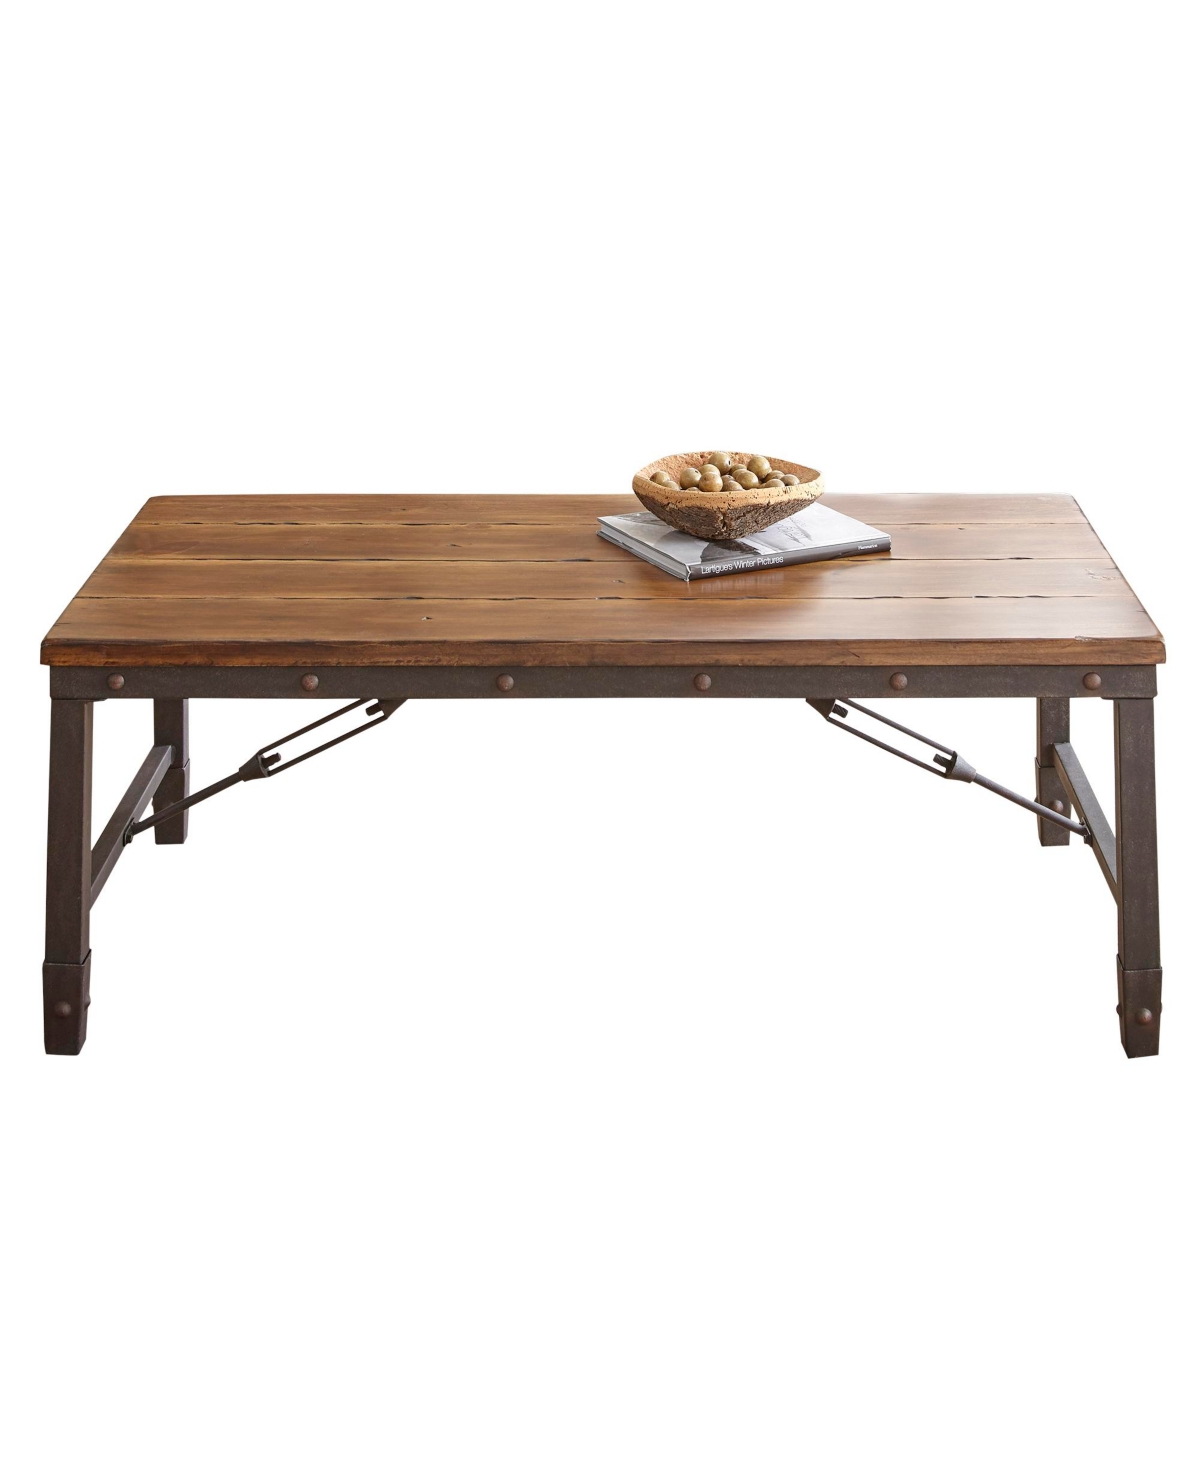 Steve Silver Ashford 48" Wood And Metal Industrial Style Cocktail Table In Antiqued-like Honey Finish